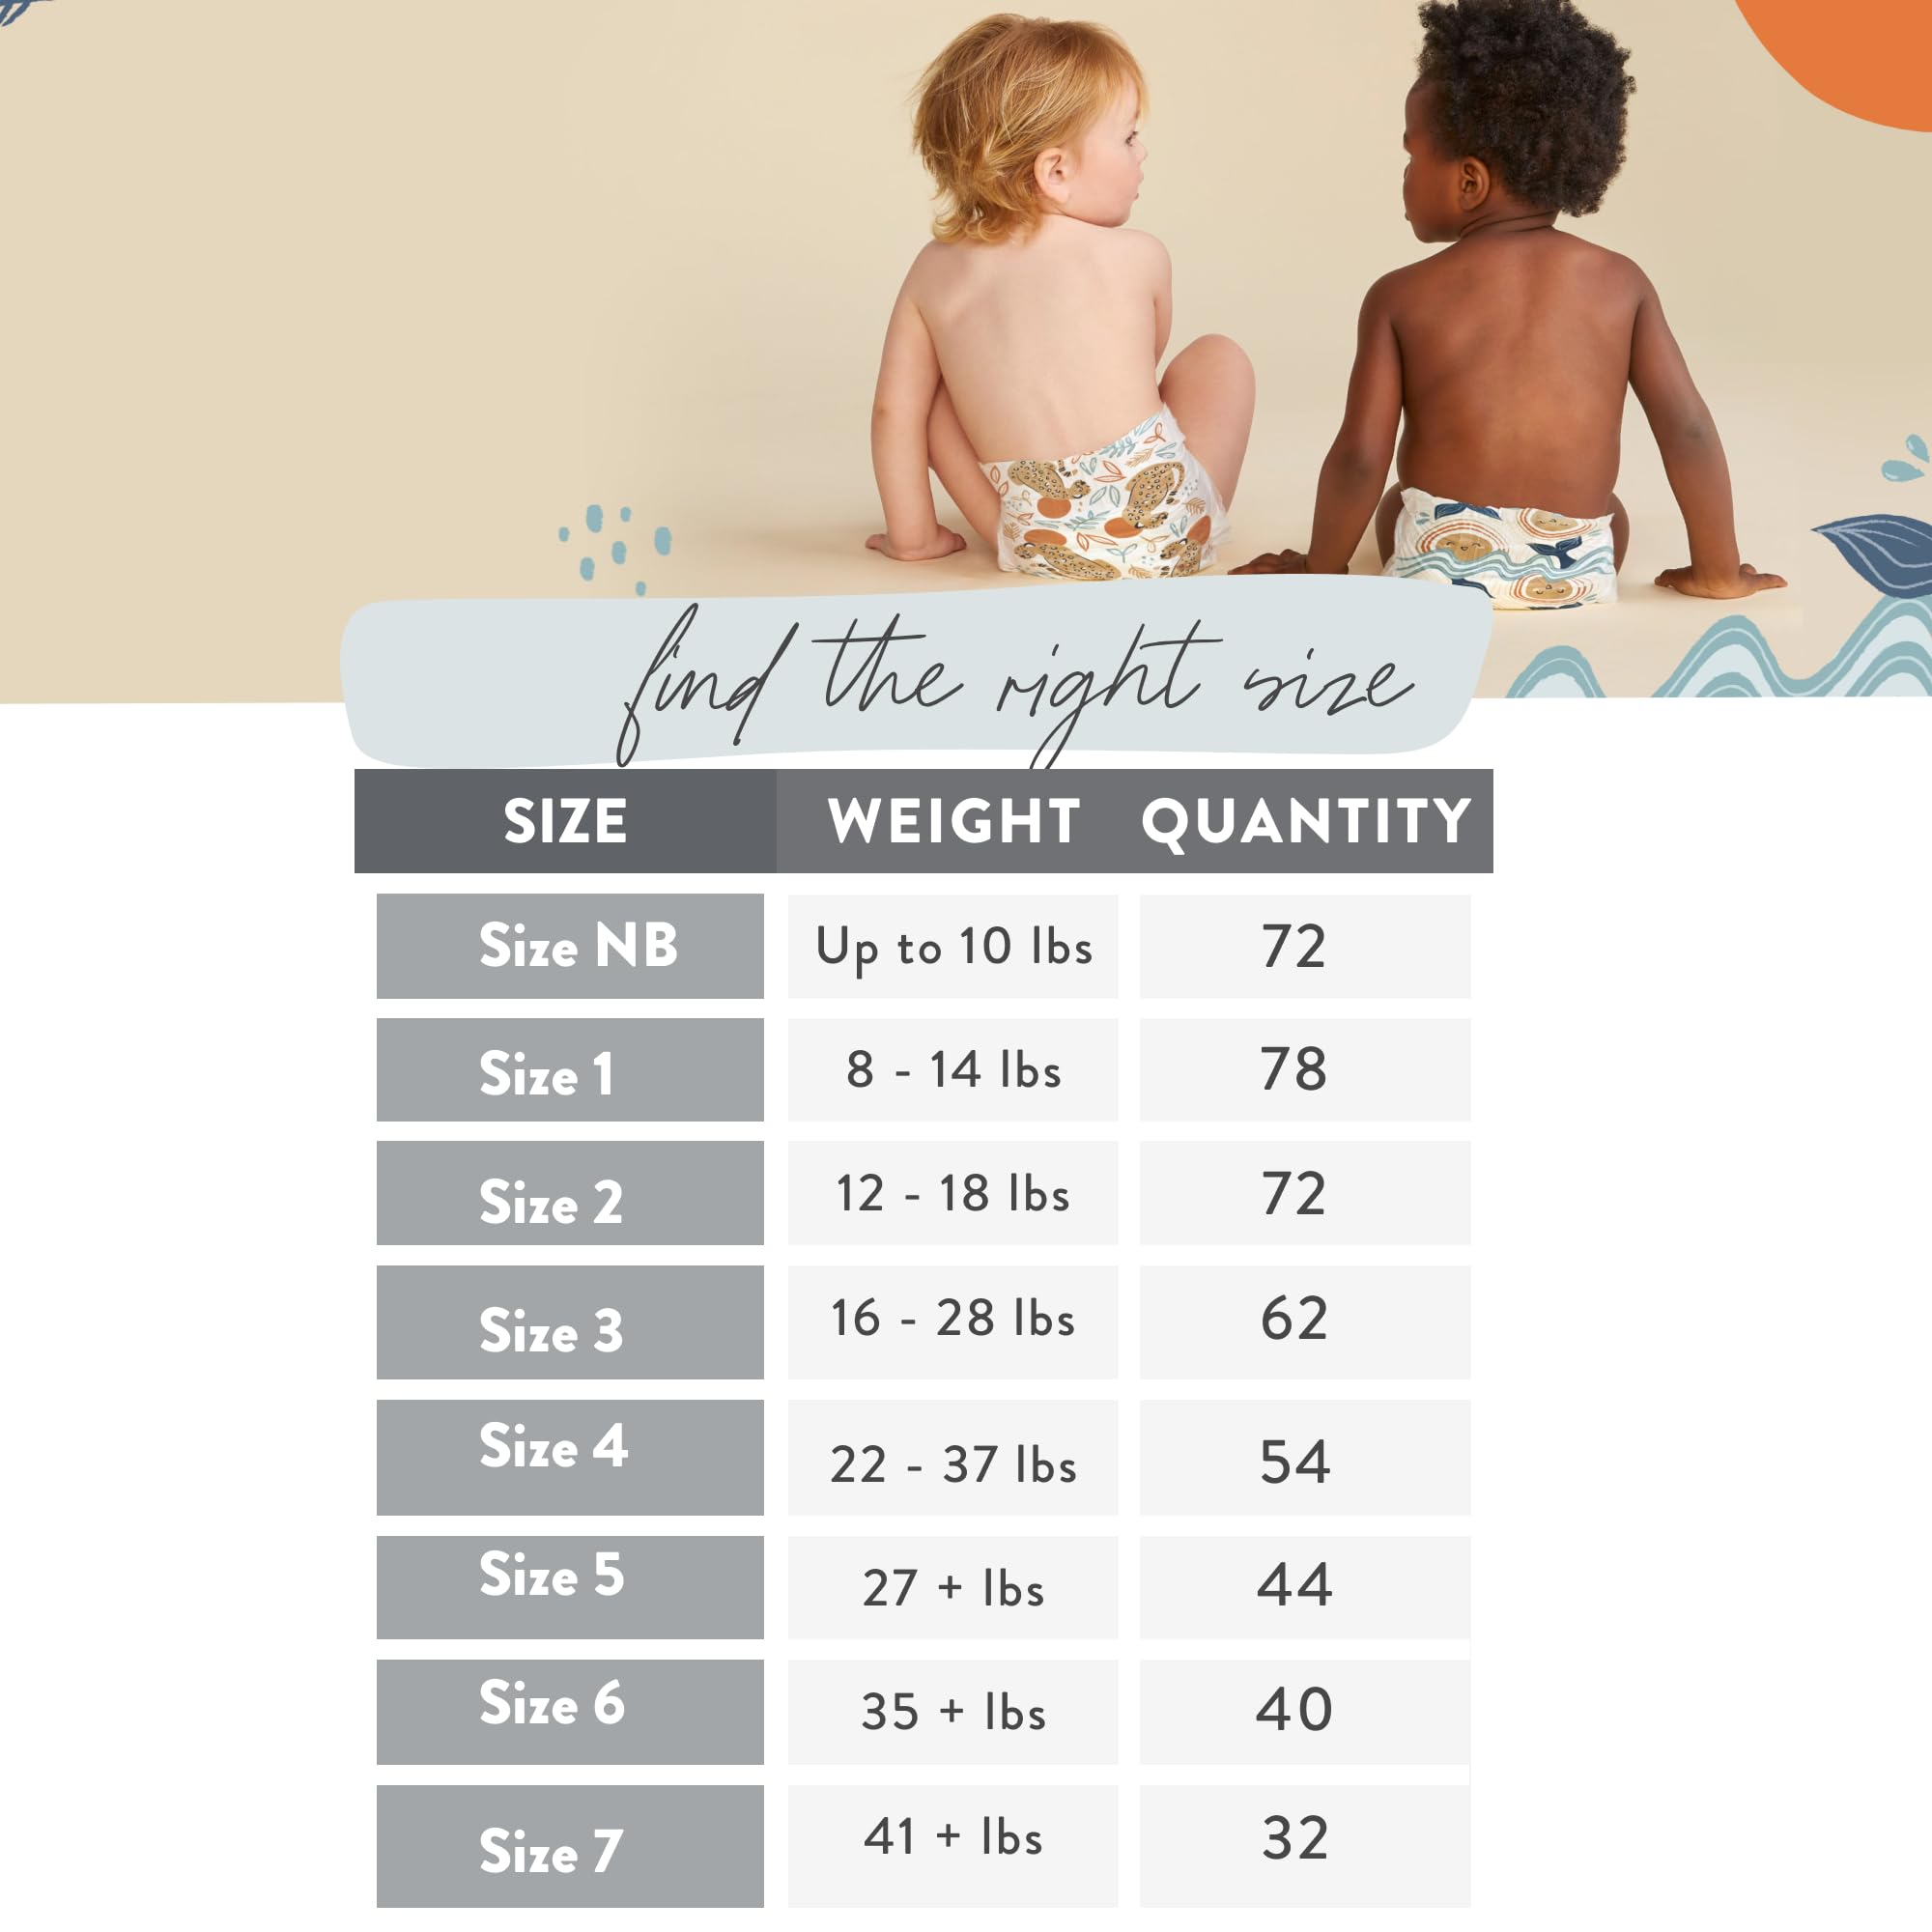 The Honest Company Clean Conscious Diapers | Plant-Based, Sustainable | Orange You Cute + Feeling Nauti | Club Box, Size 3 (16-28 lbs), 62 Count